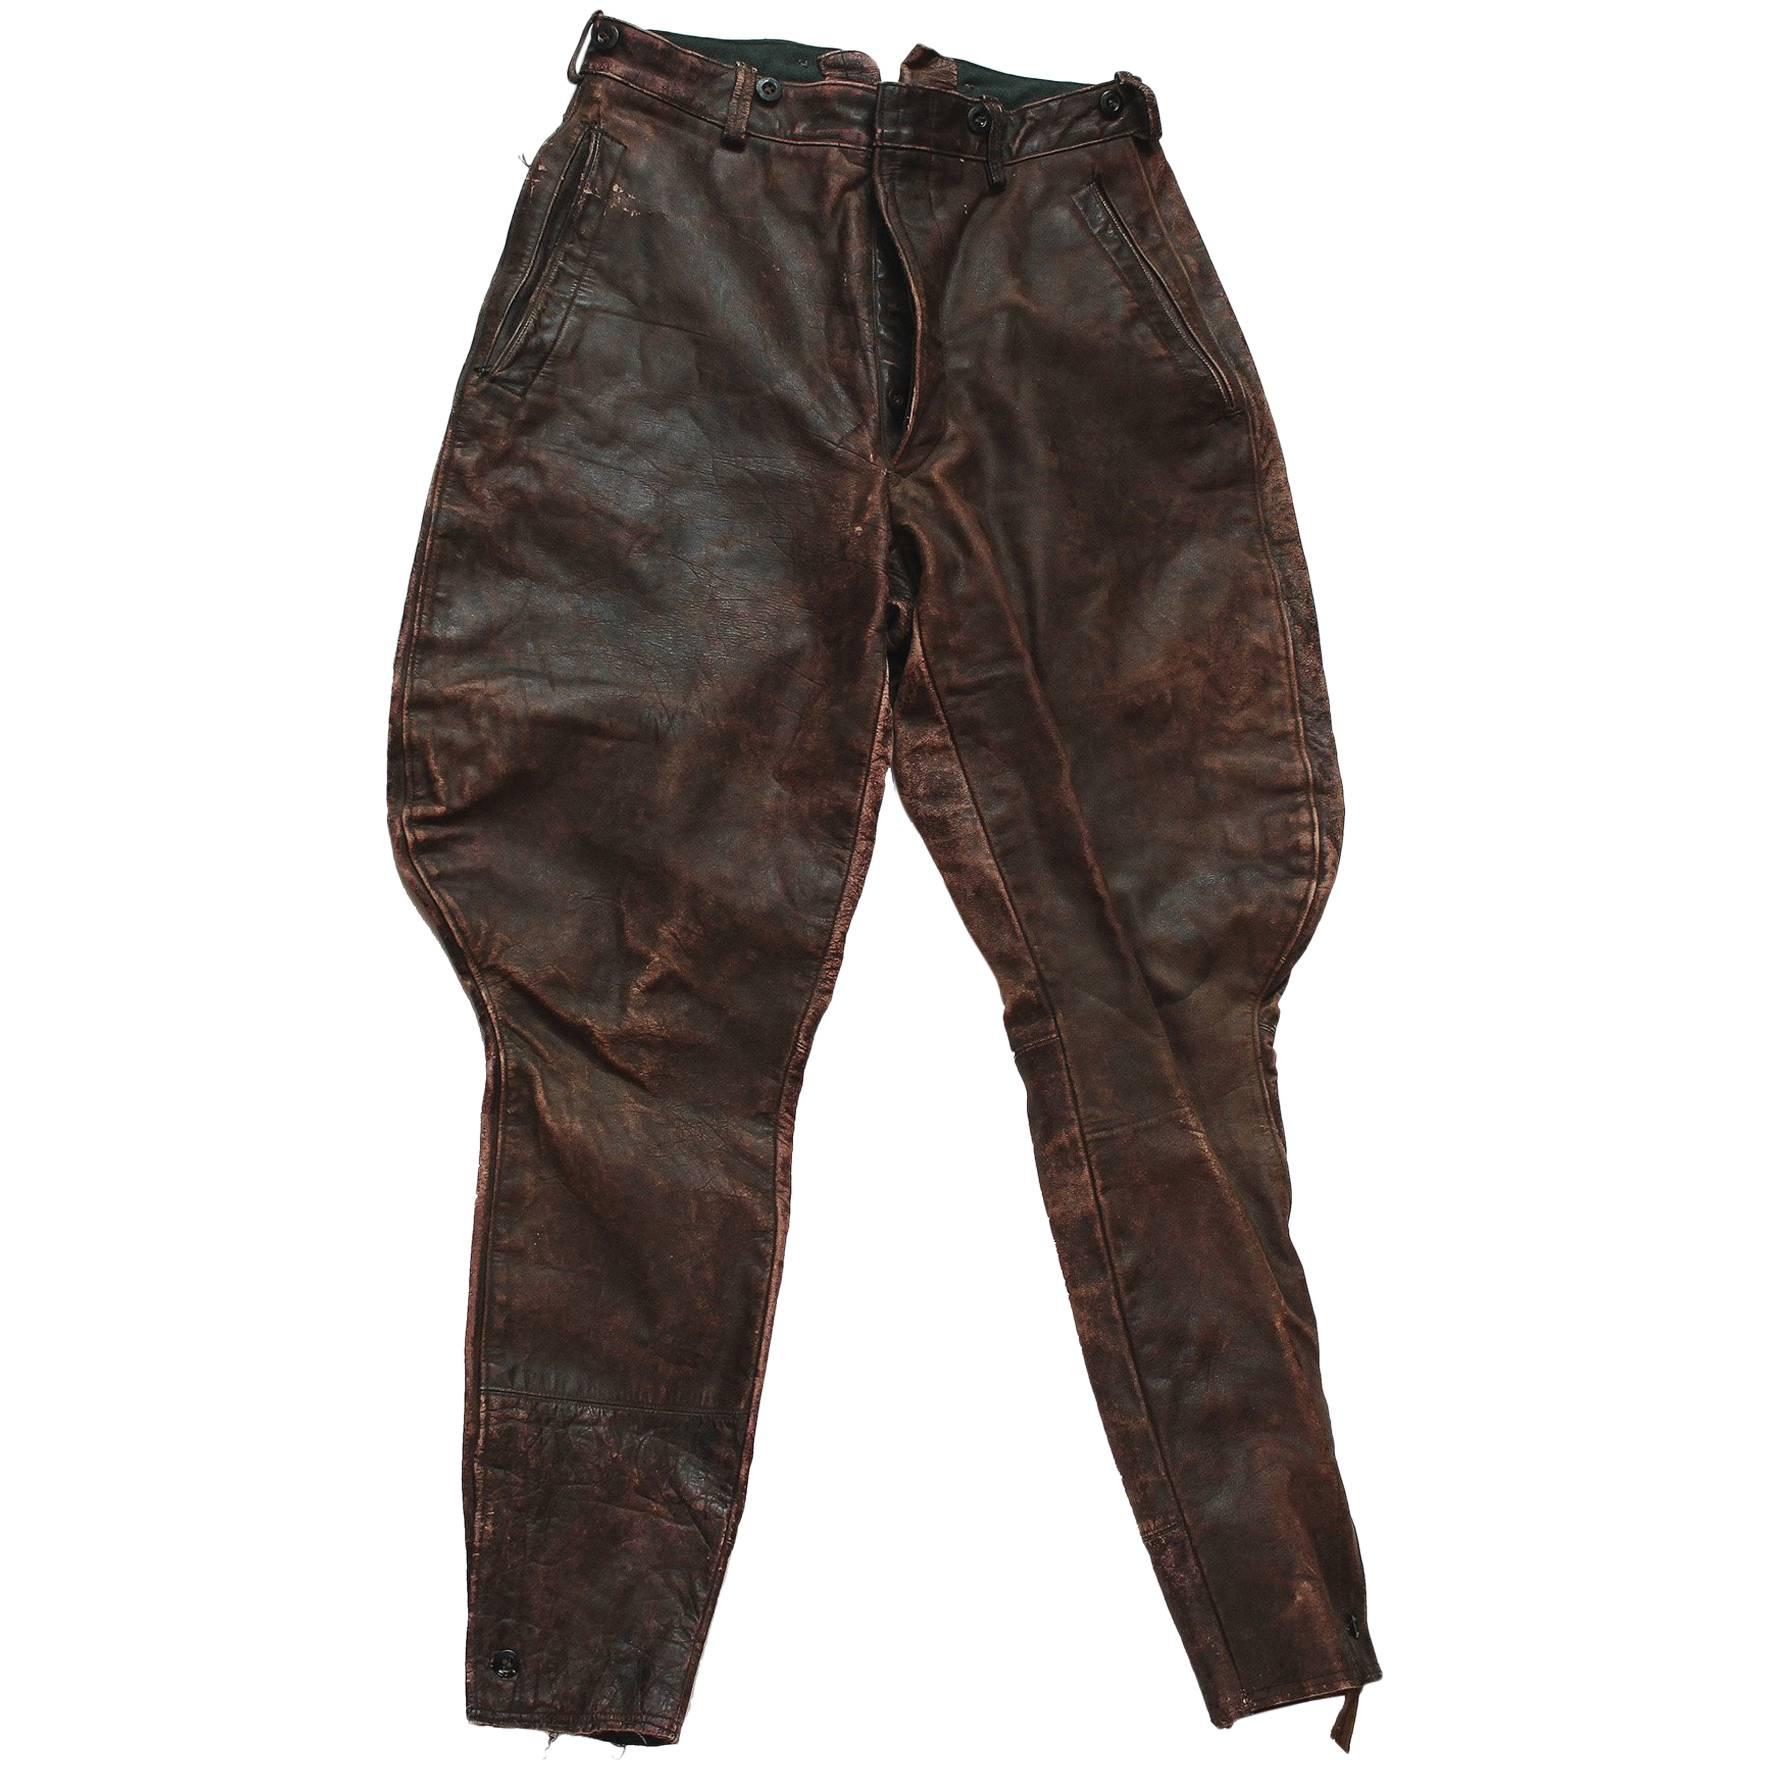 1930s Motorcycle Riding Pants